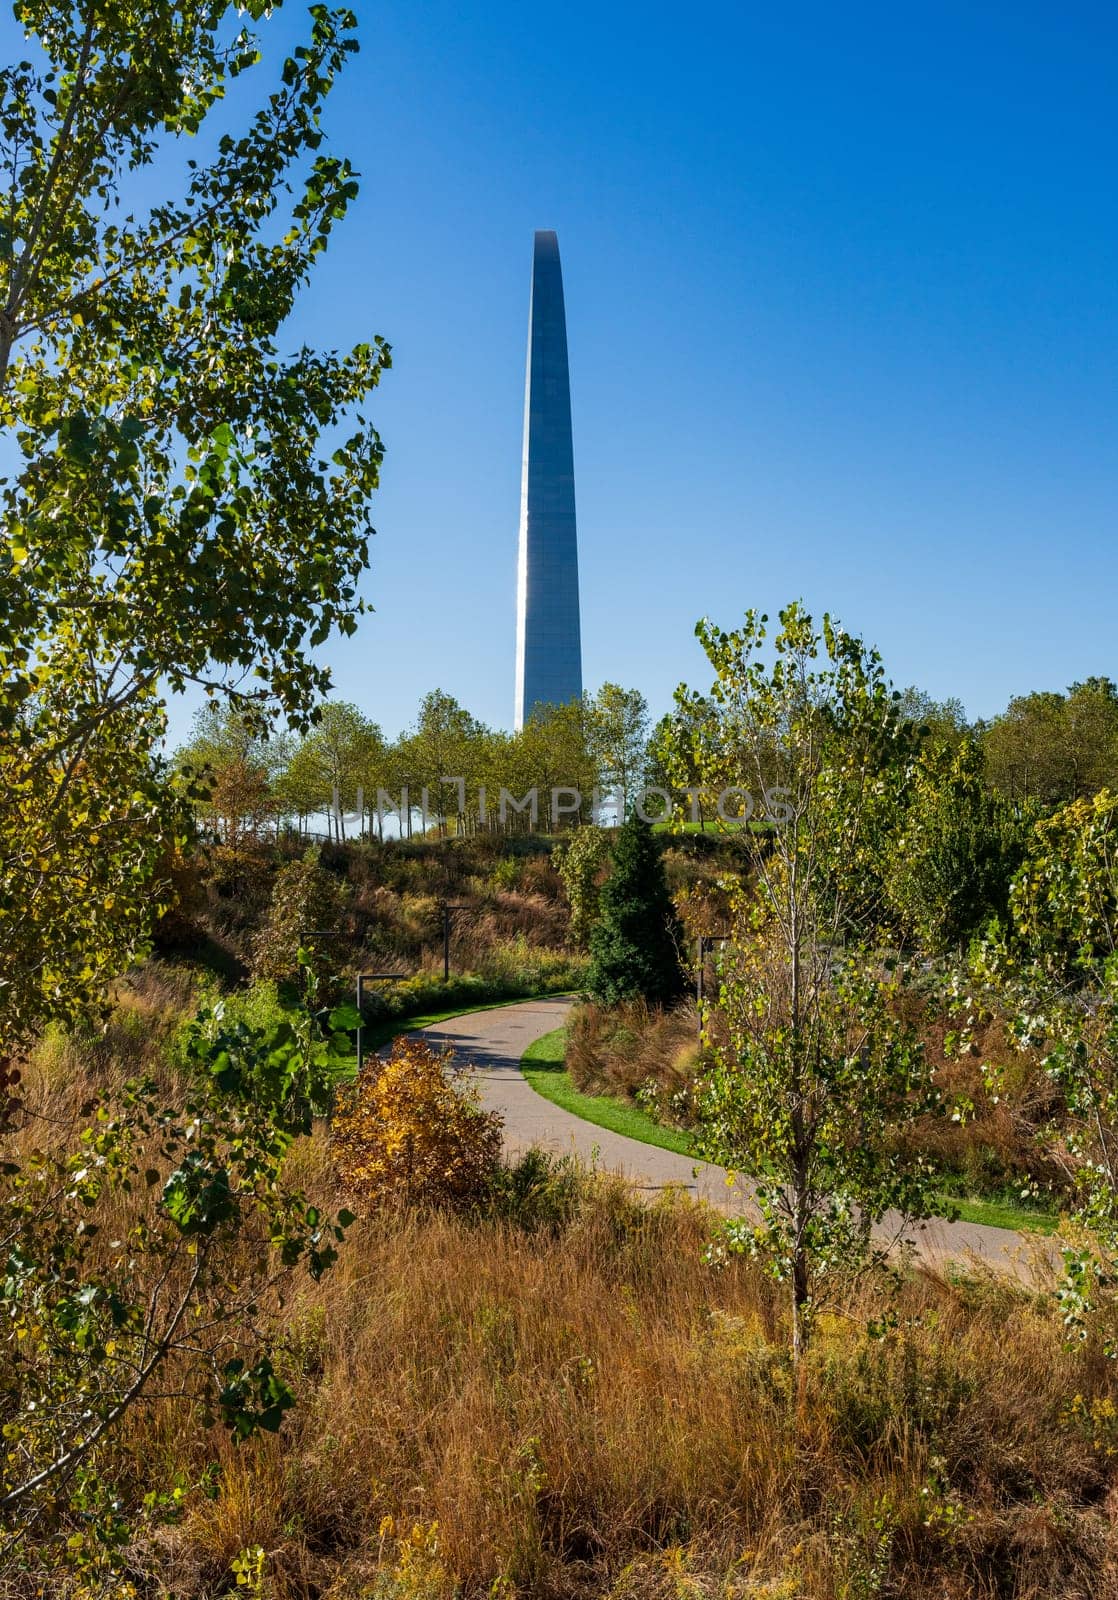 Gateway Arch of St Louis Missouri seen from Explorers Park by steheap